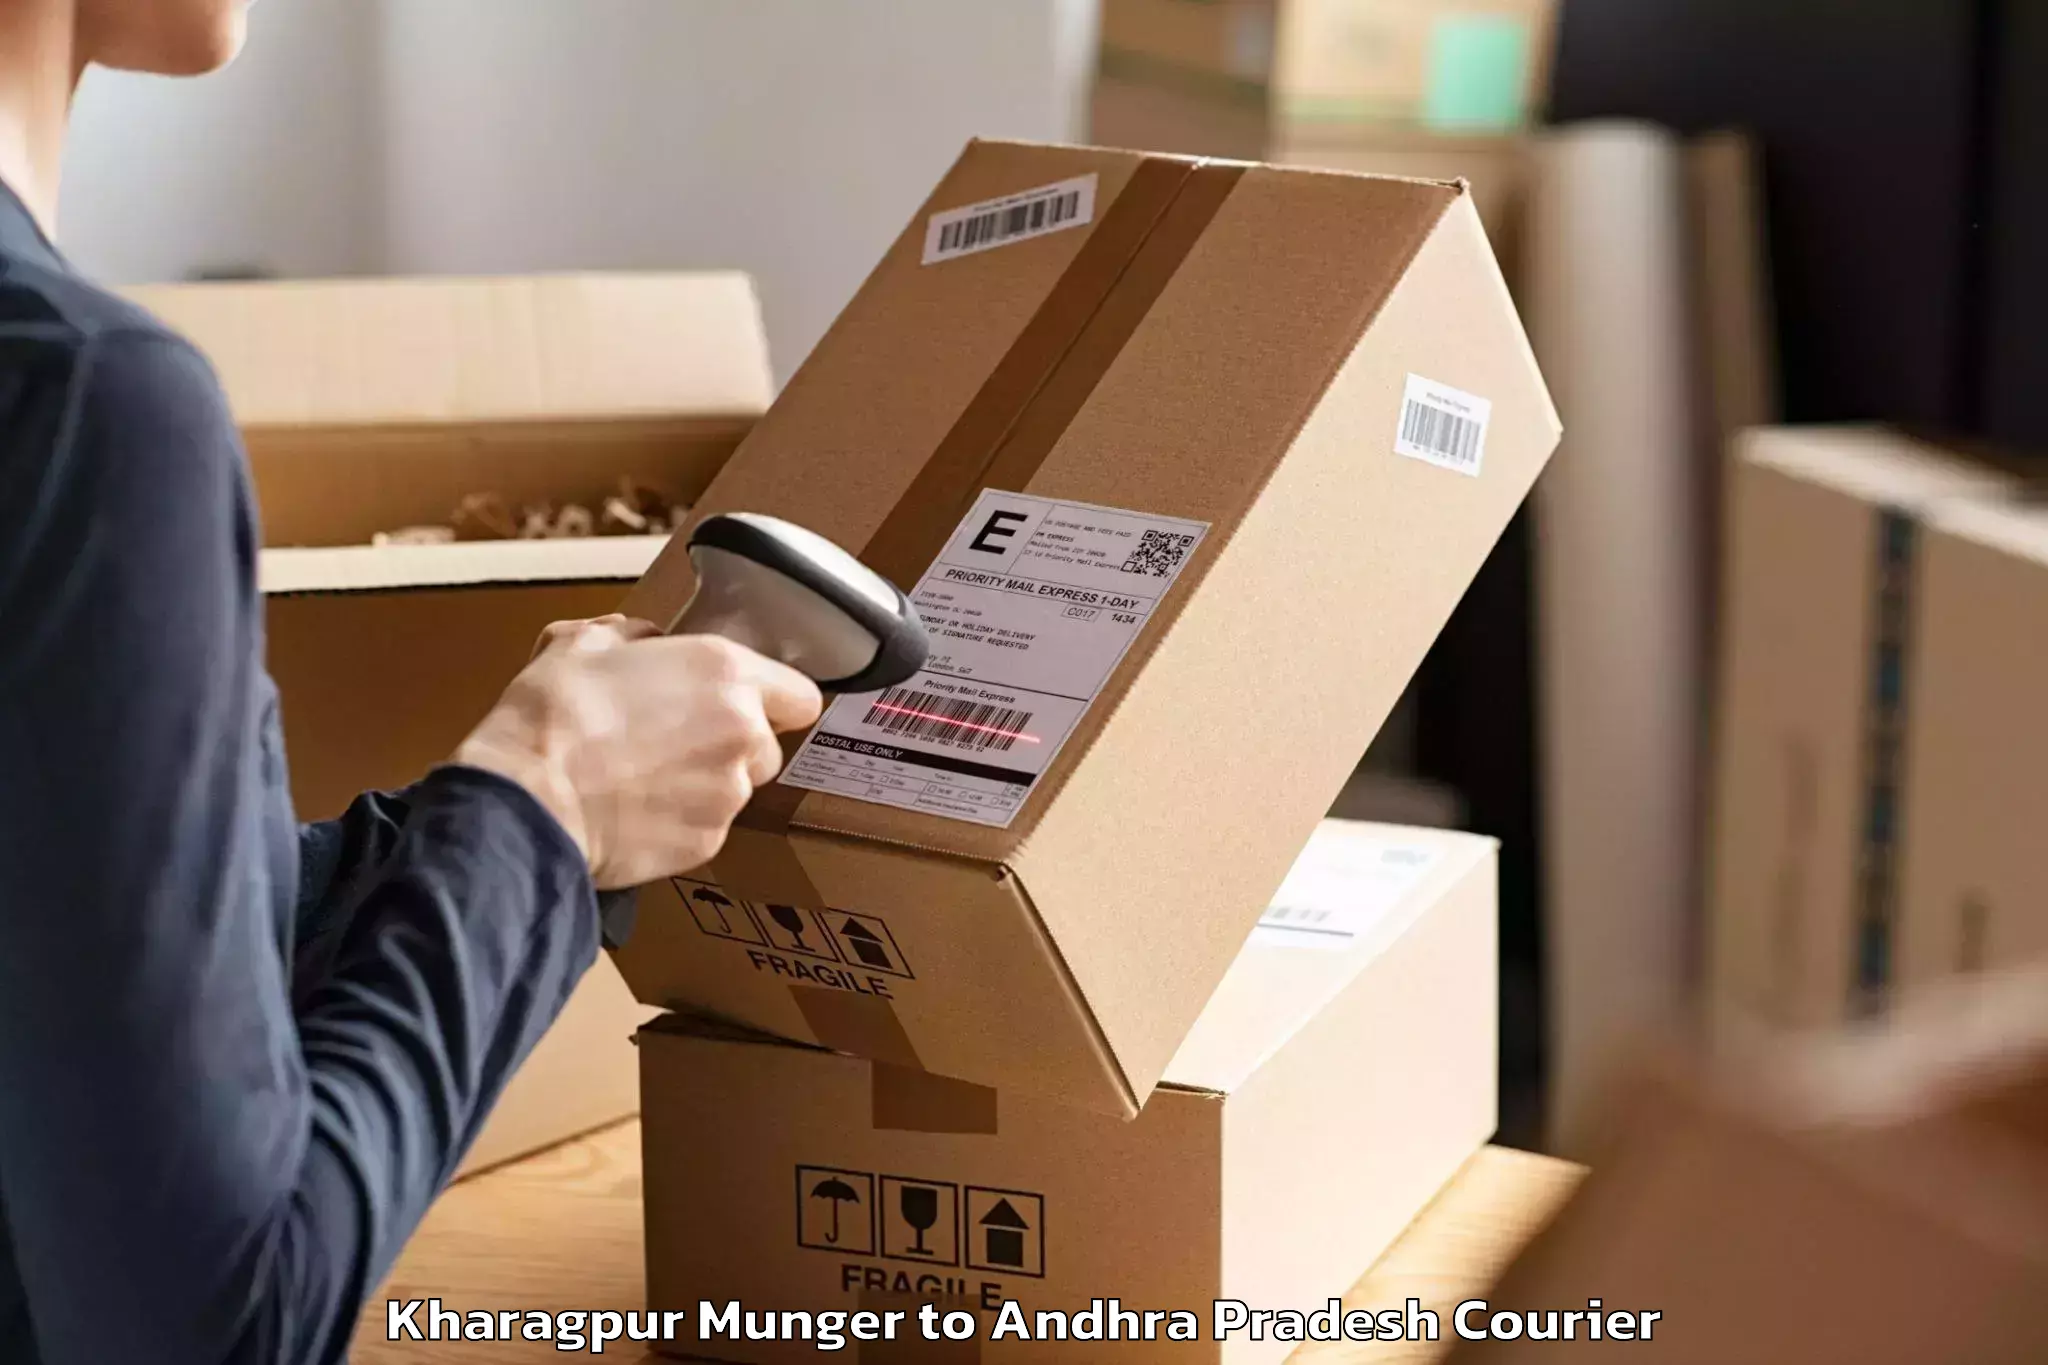 Household goods movers and packers Kharagpur Munger to Andhra Pradesh